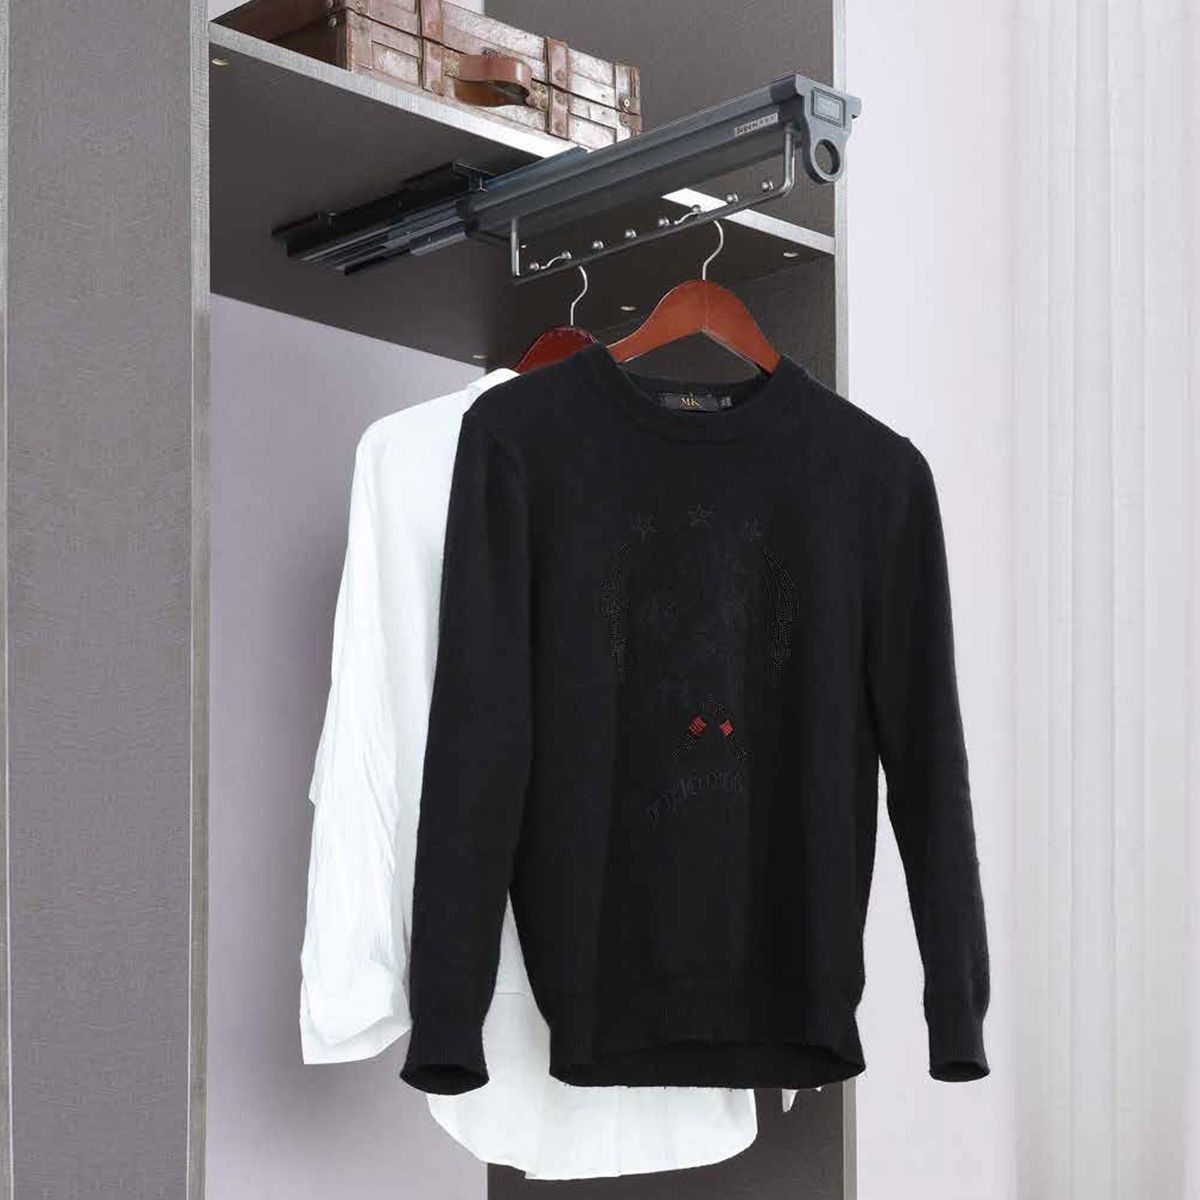 Top mounted clothes holder 